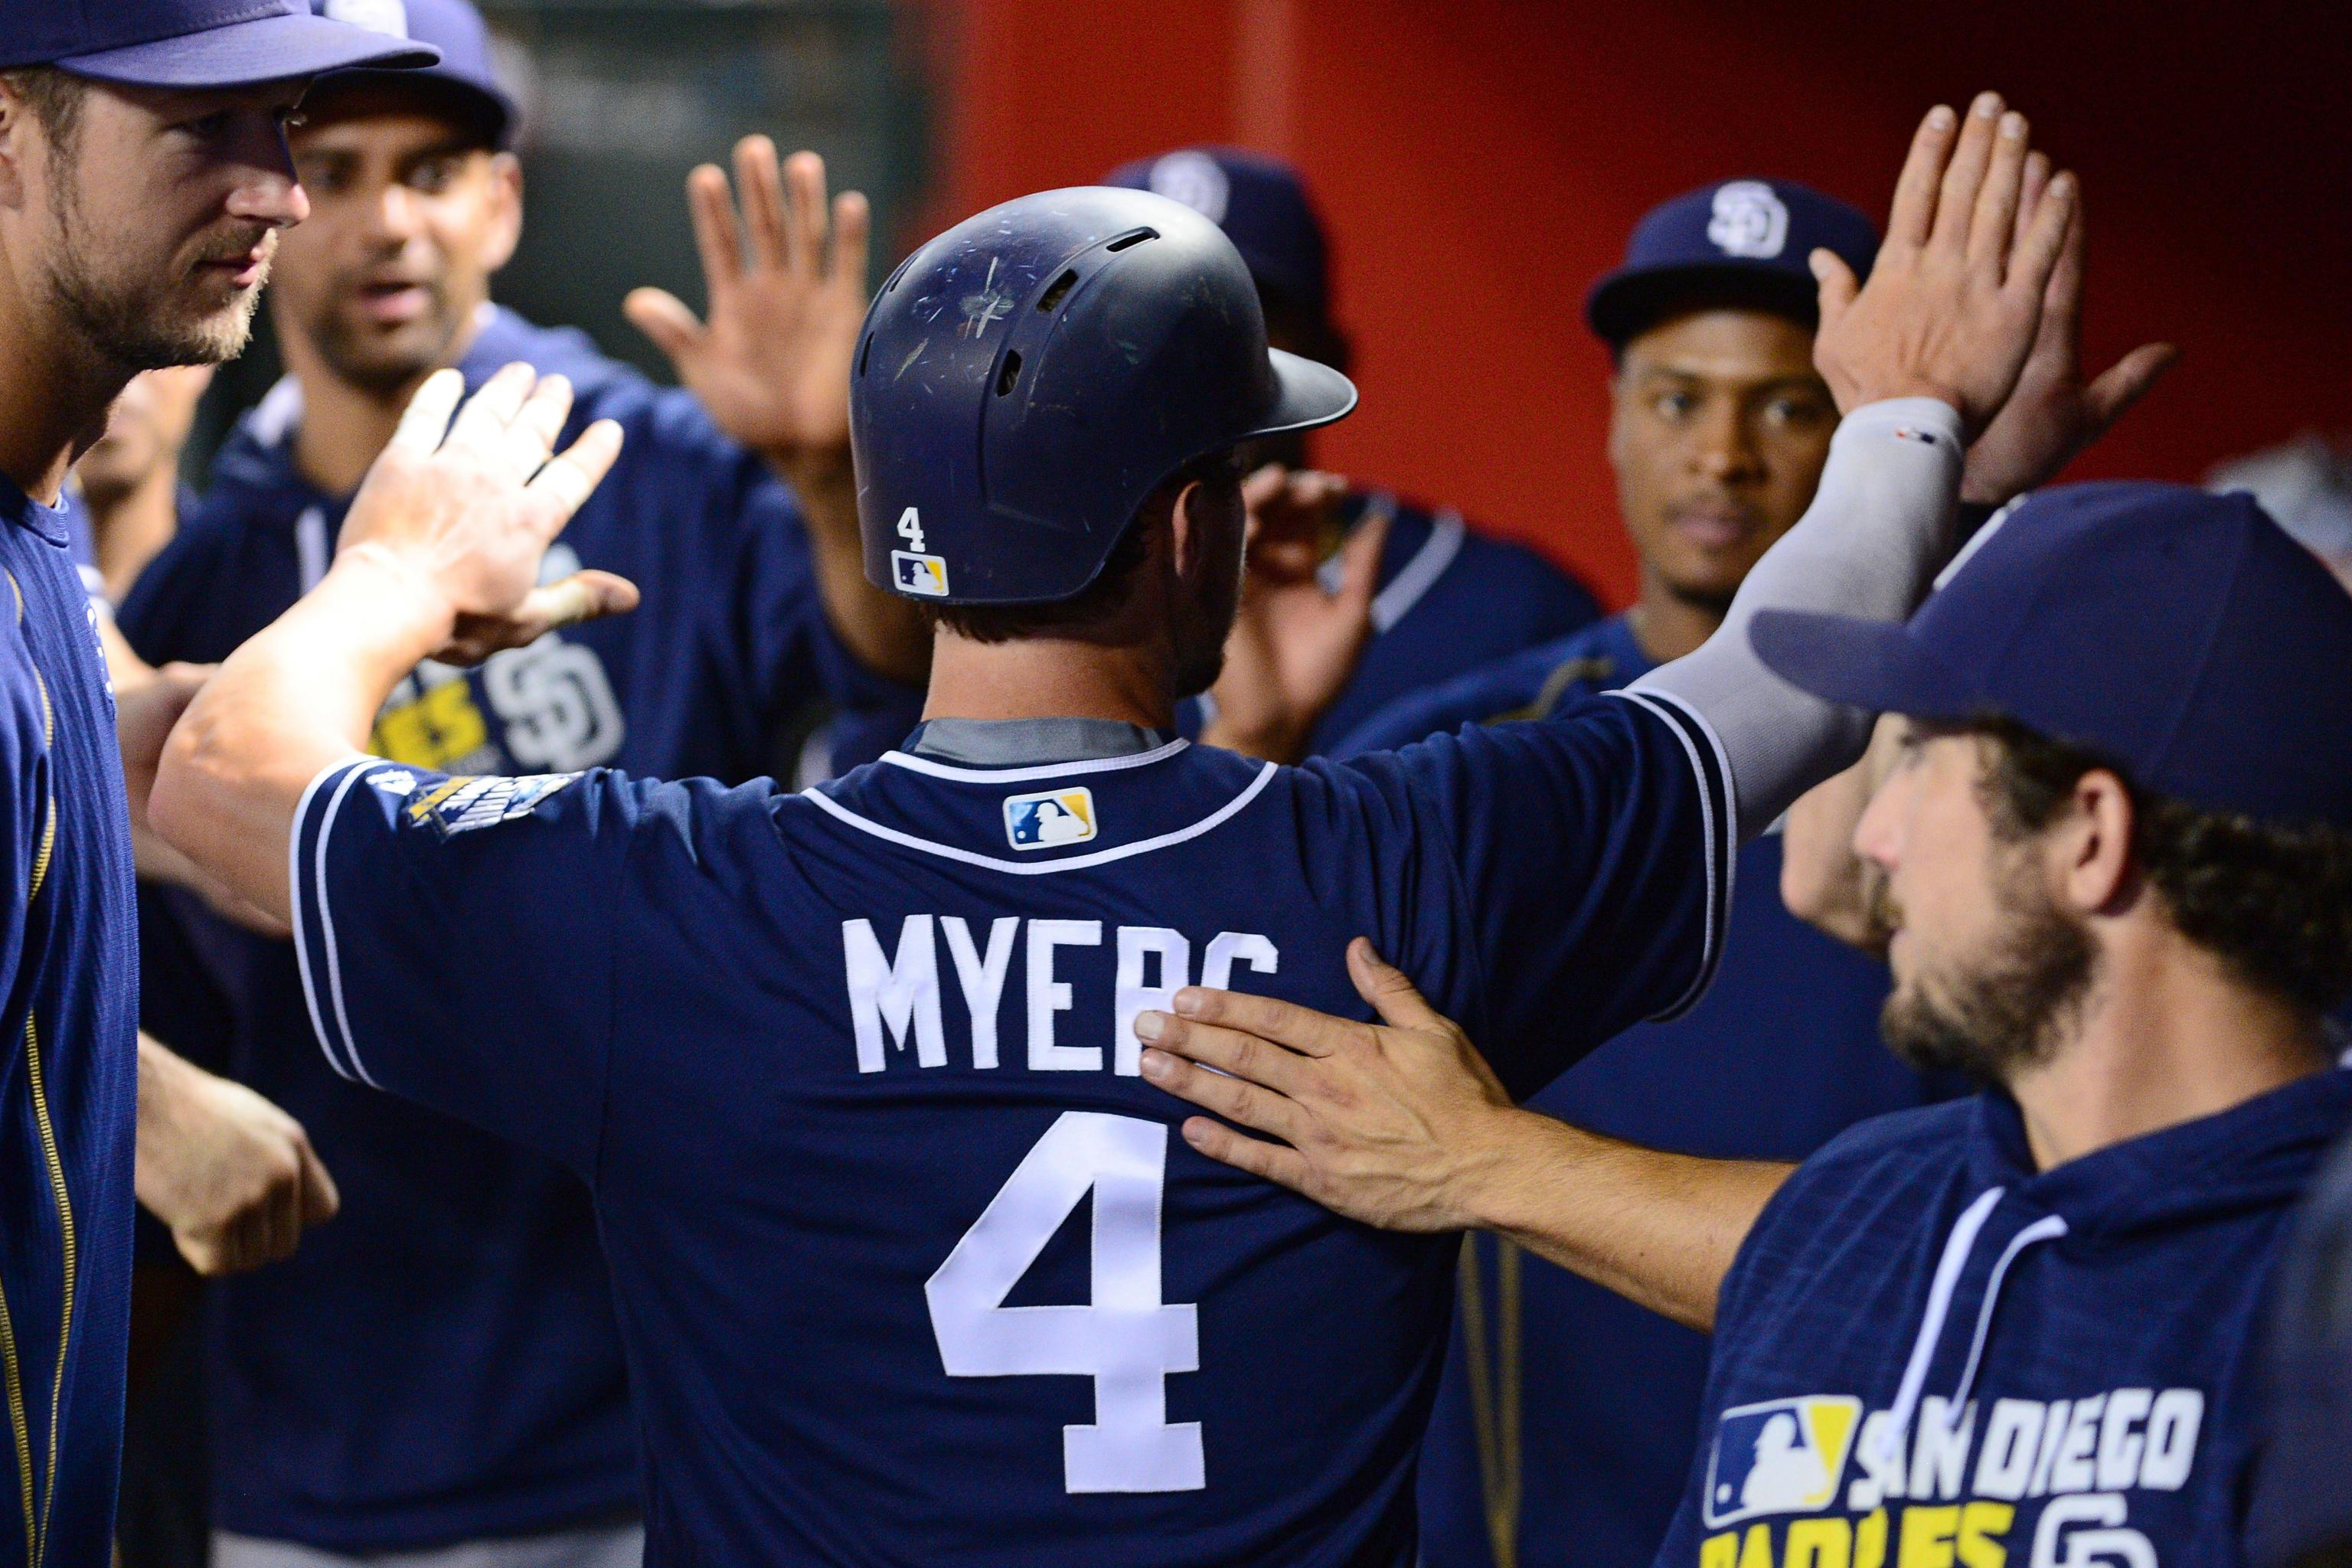 Padres Extend Wil Myers - MLB Trade Rumors